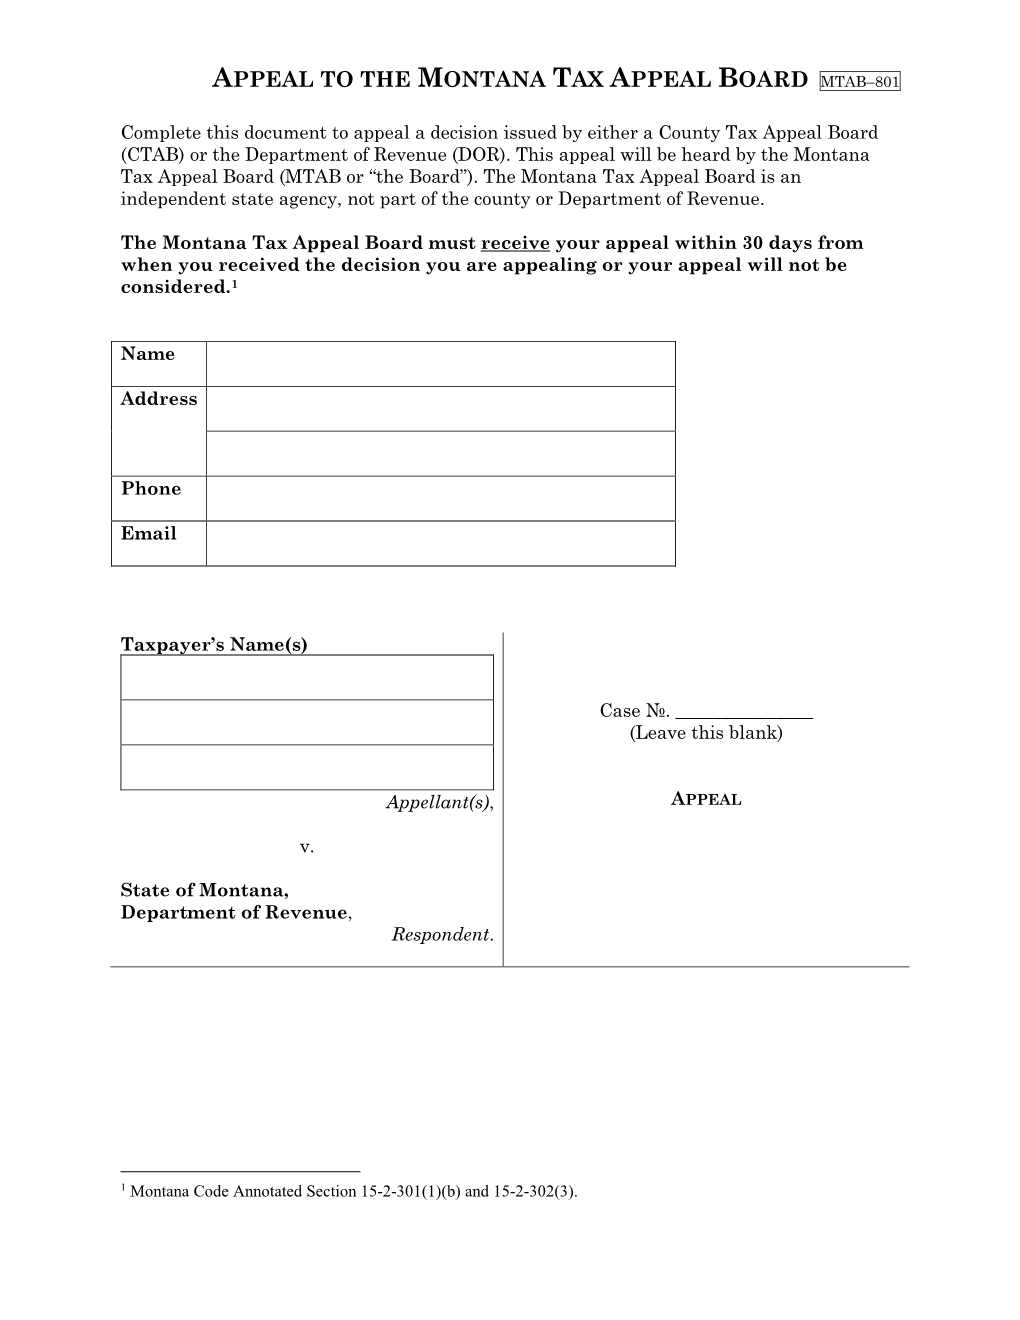 Appeal to MTAB Form